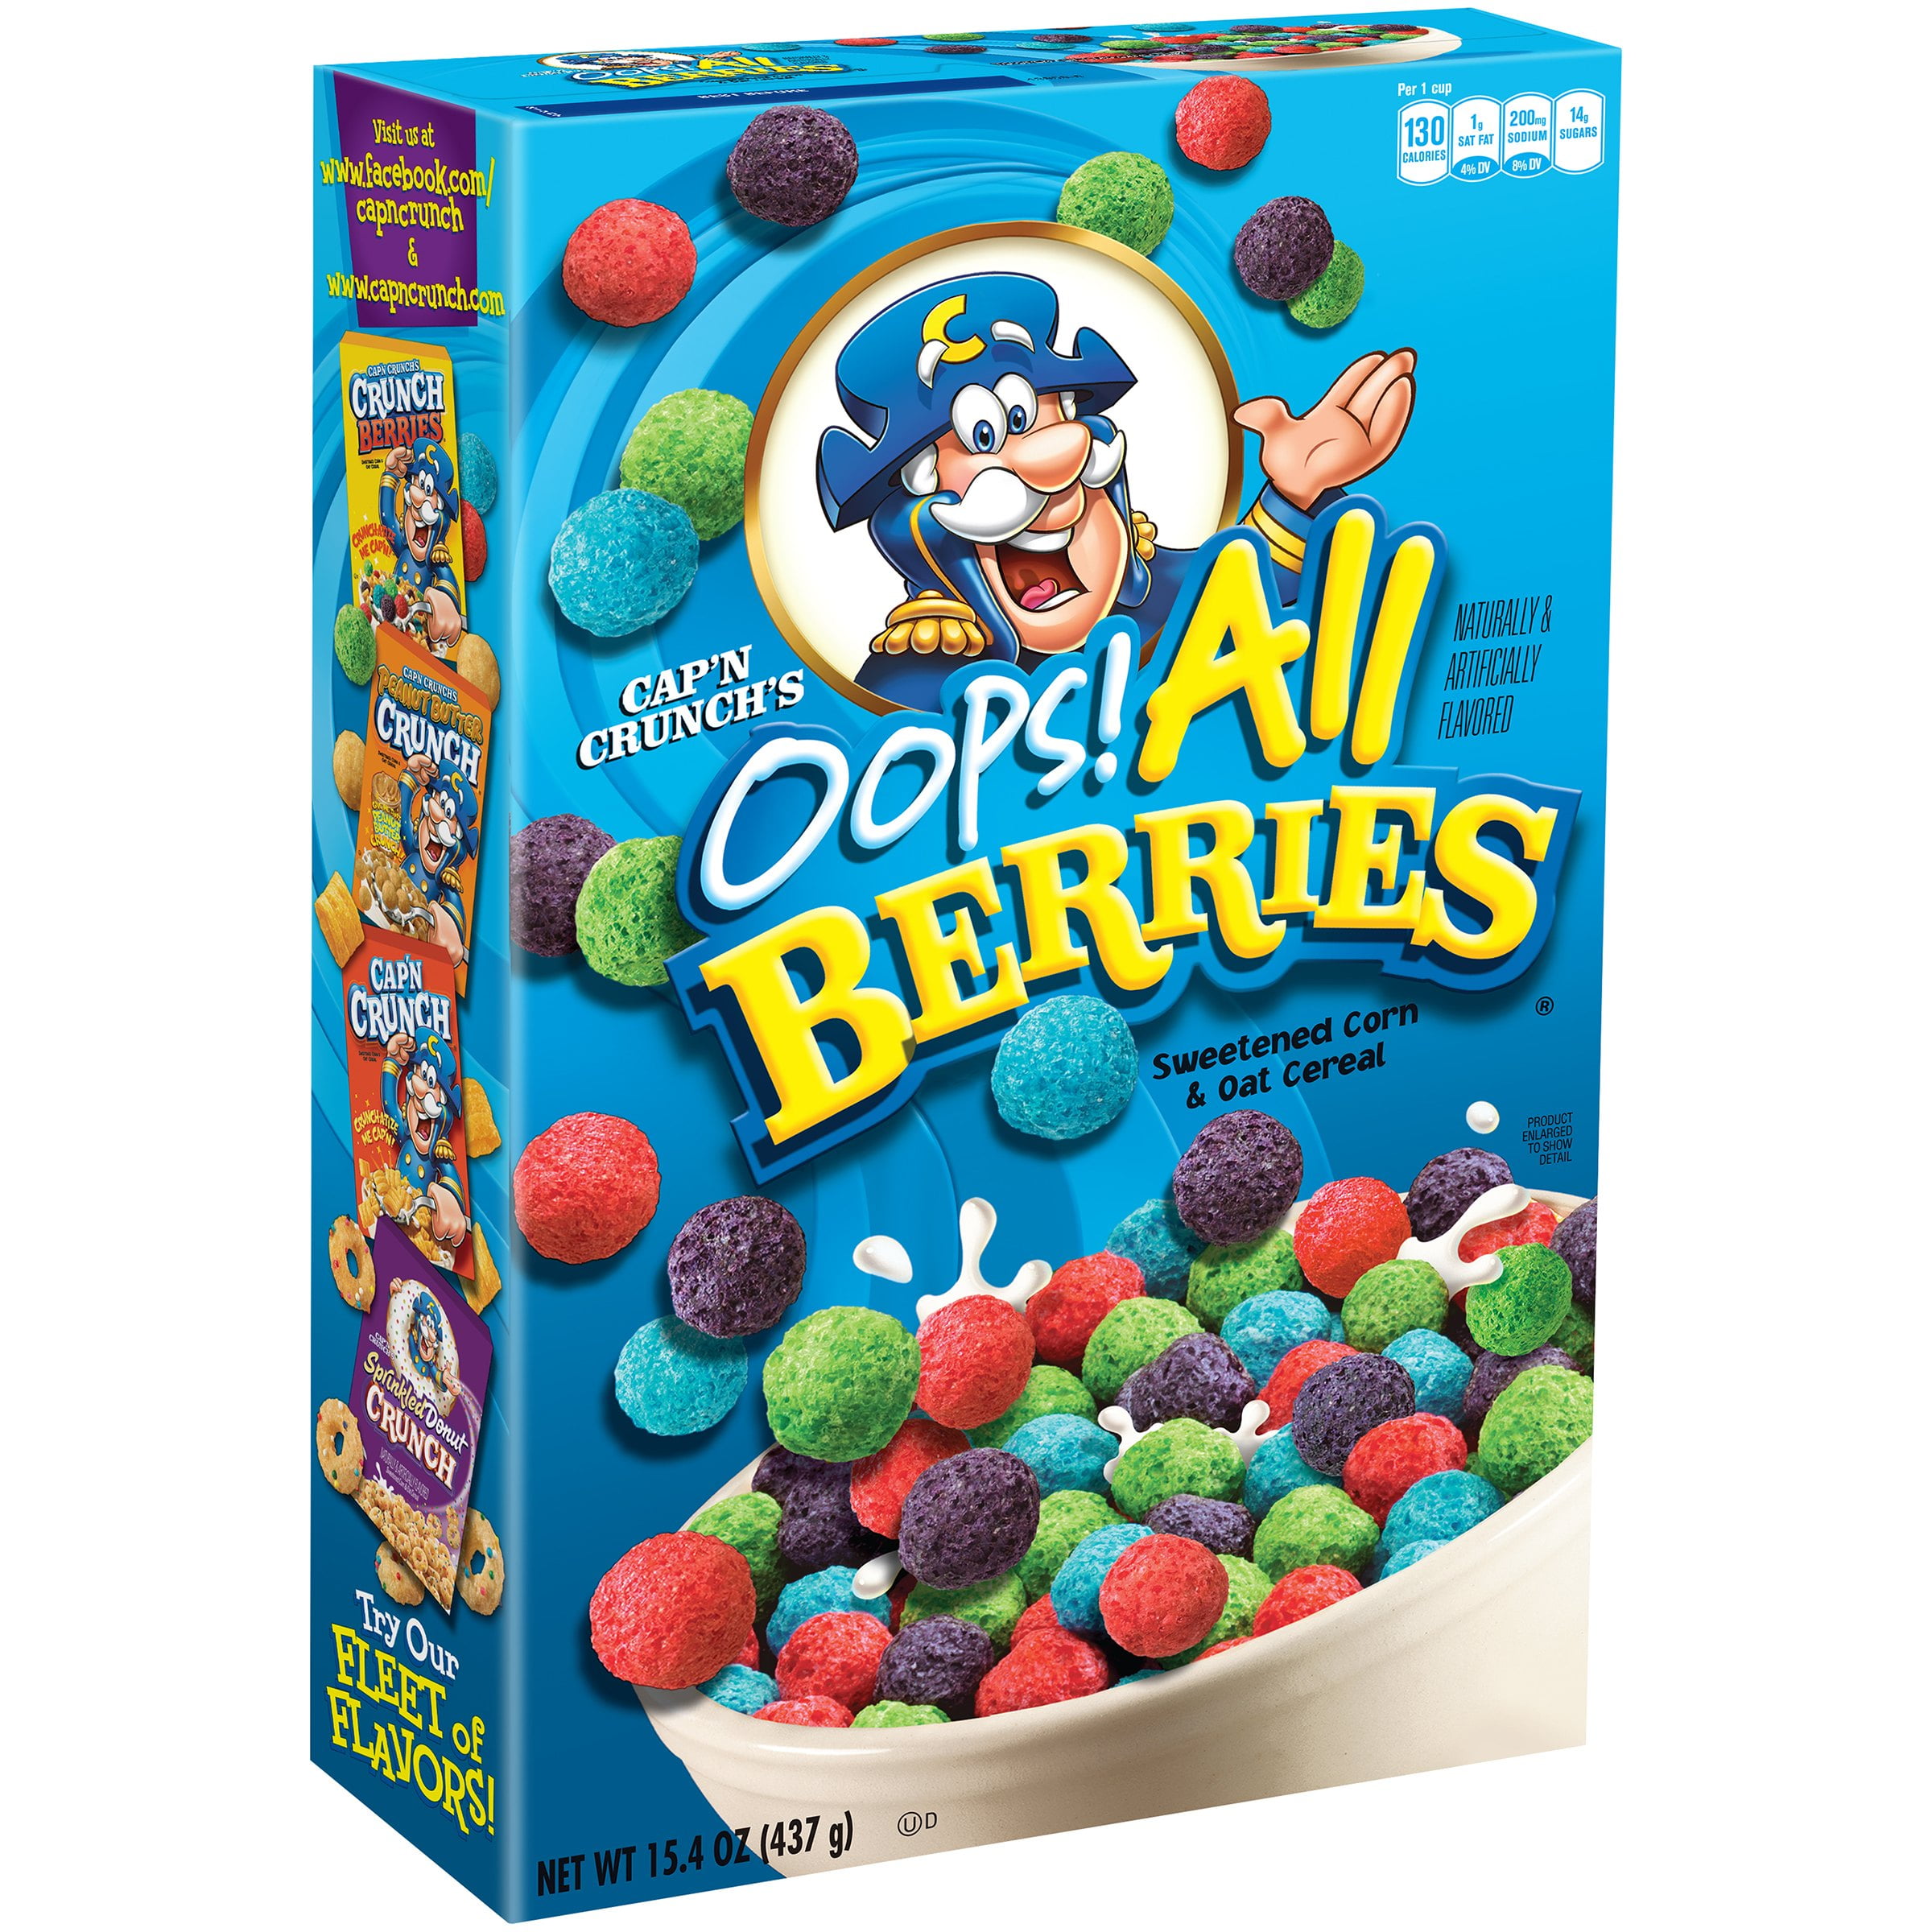 Im all about Oops all berries. 